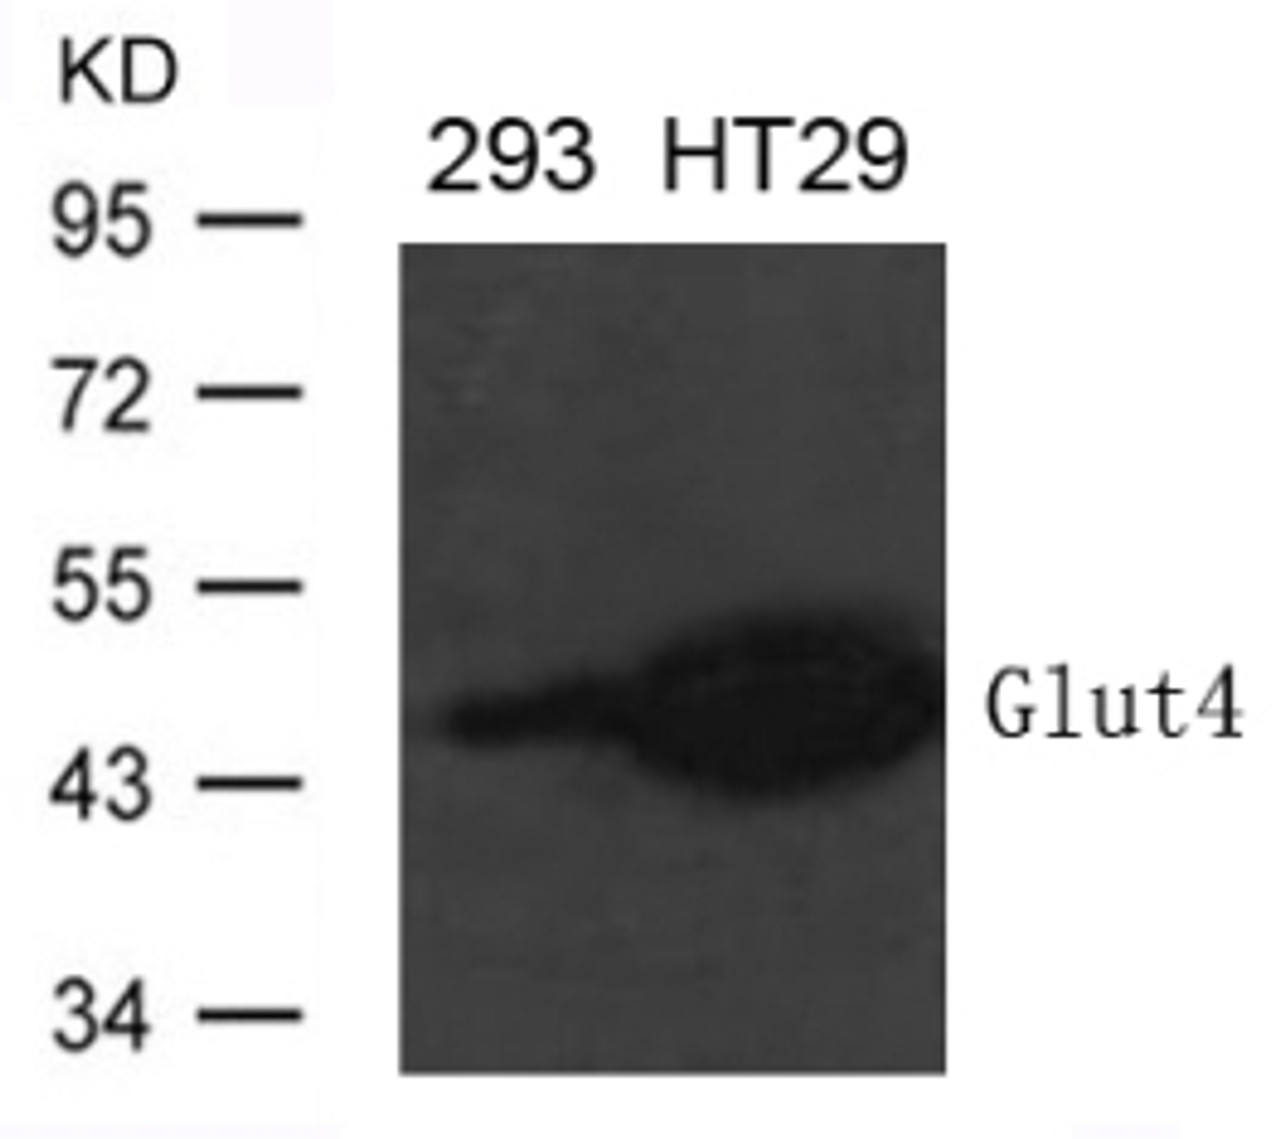 Western blot analysis of extract from 293 and HT-29 cells using Glut4 Antibody.